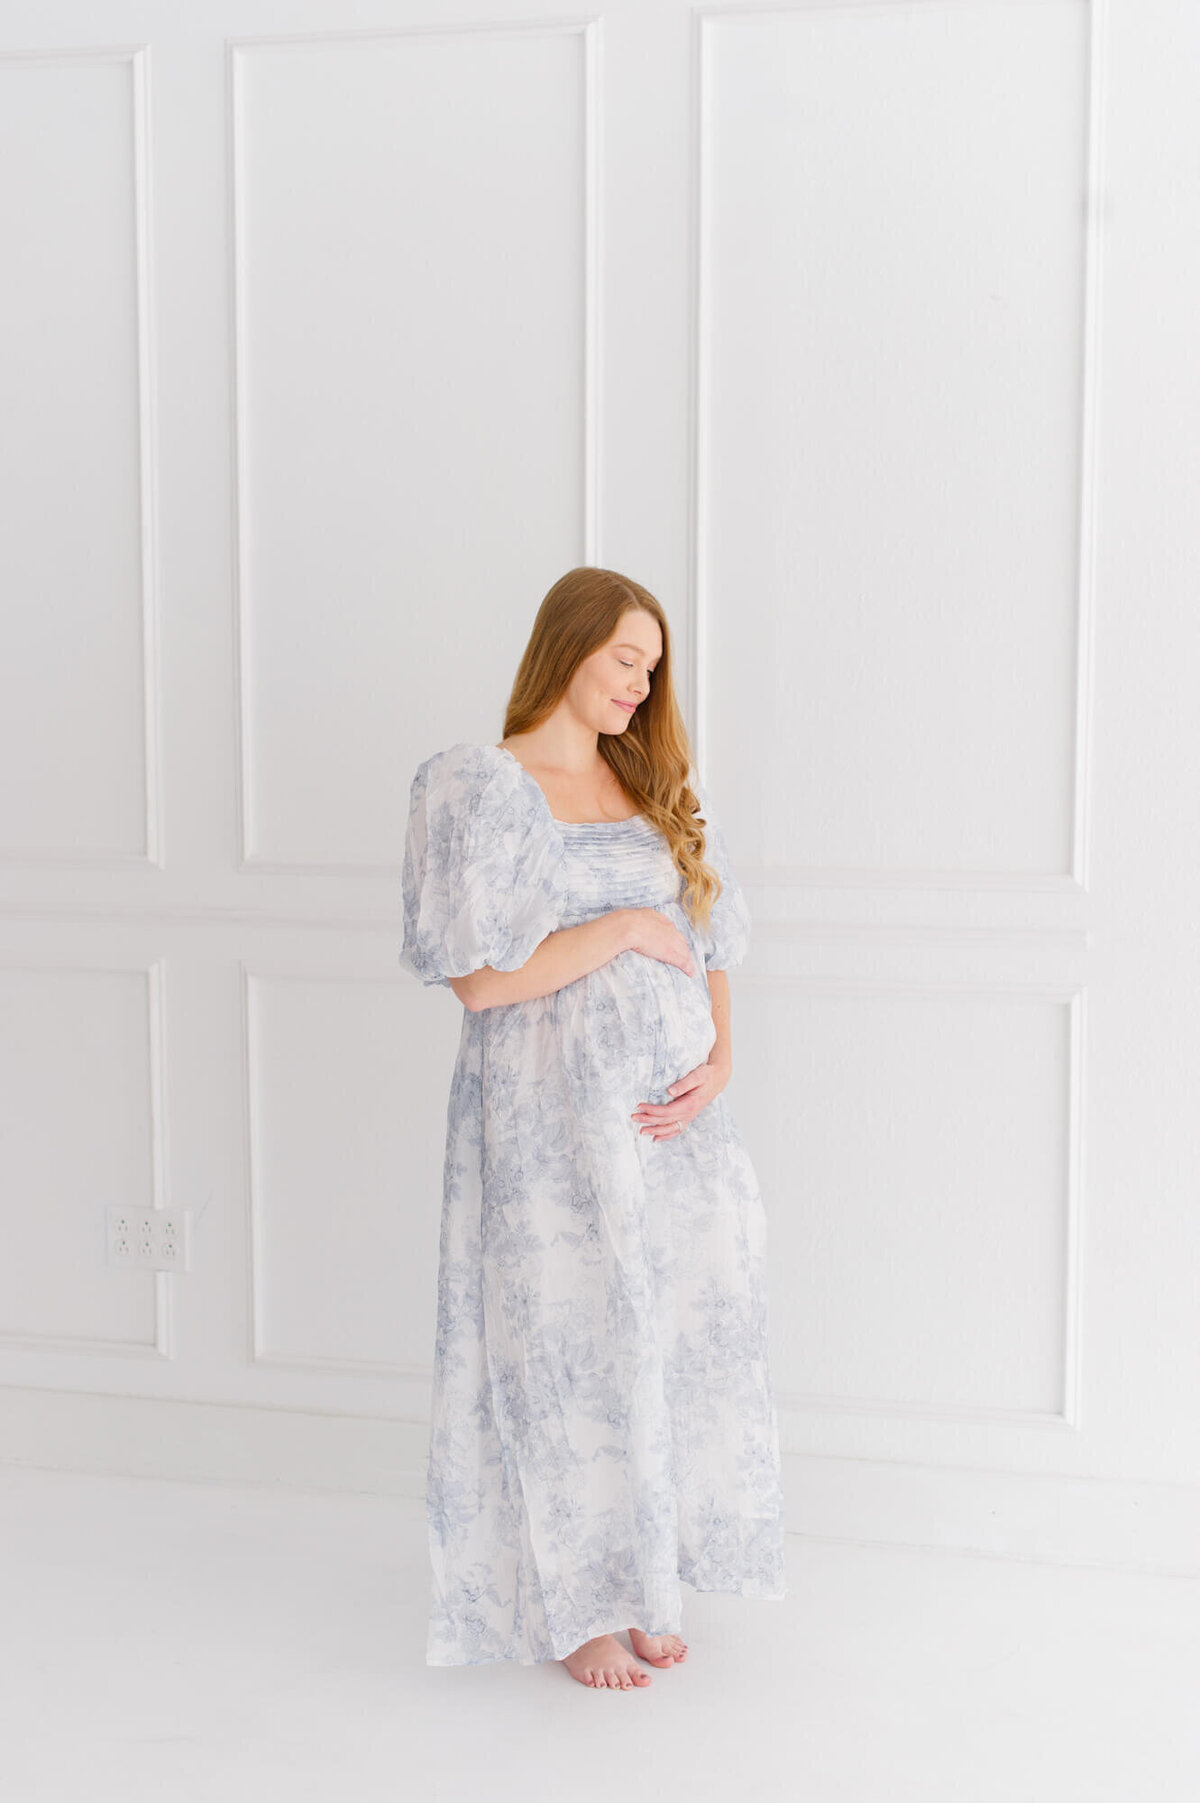 Pregnant mom stands in front of beautiful white studio wall while holding her belly